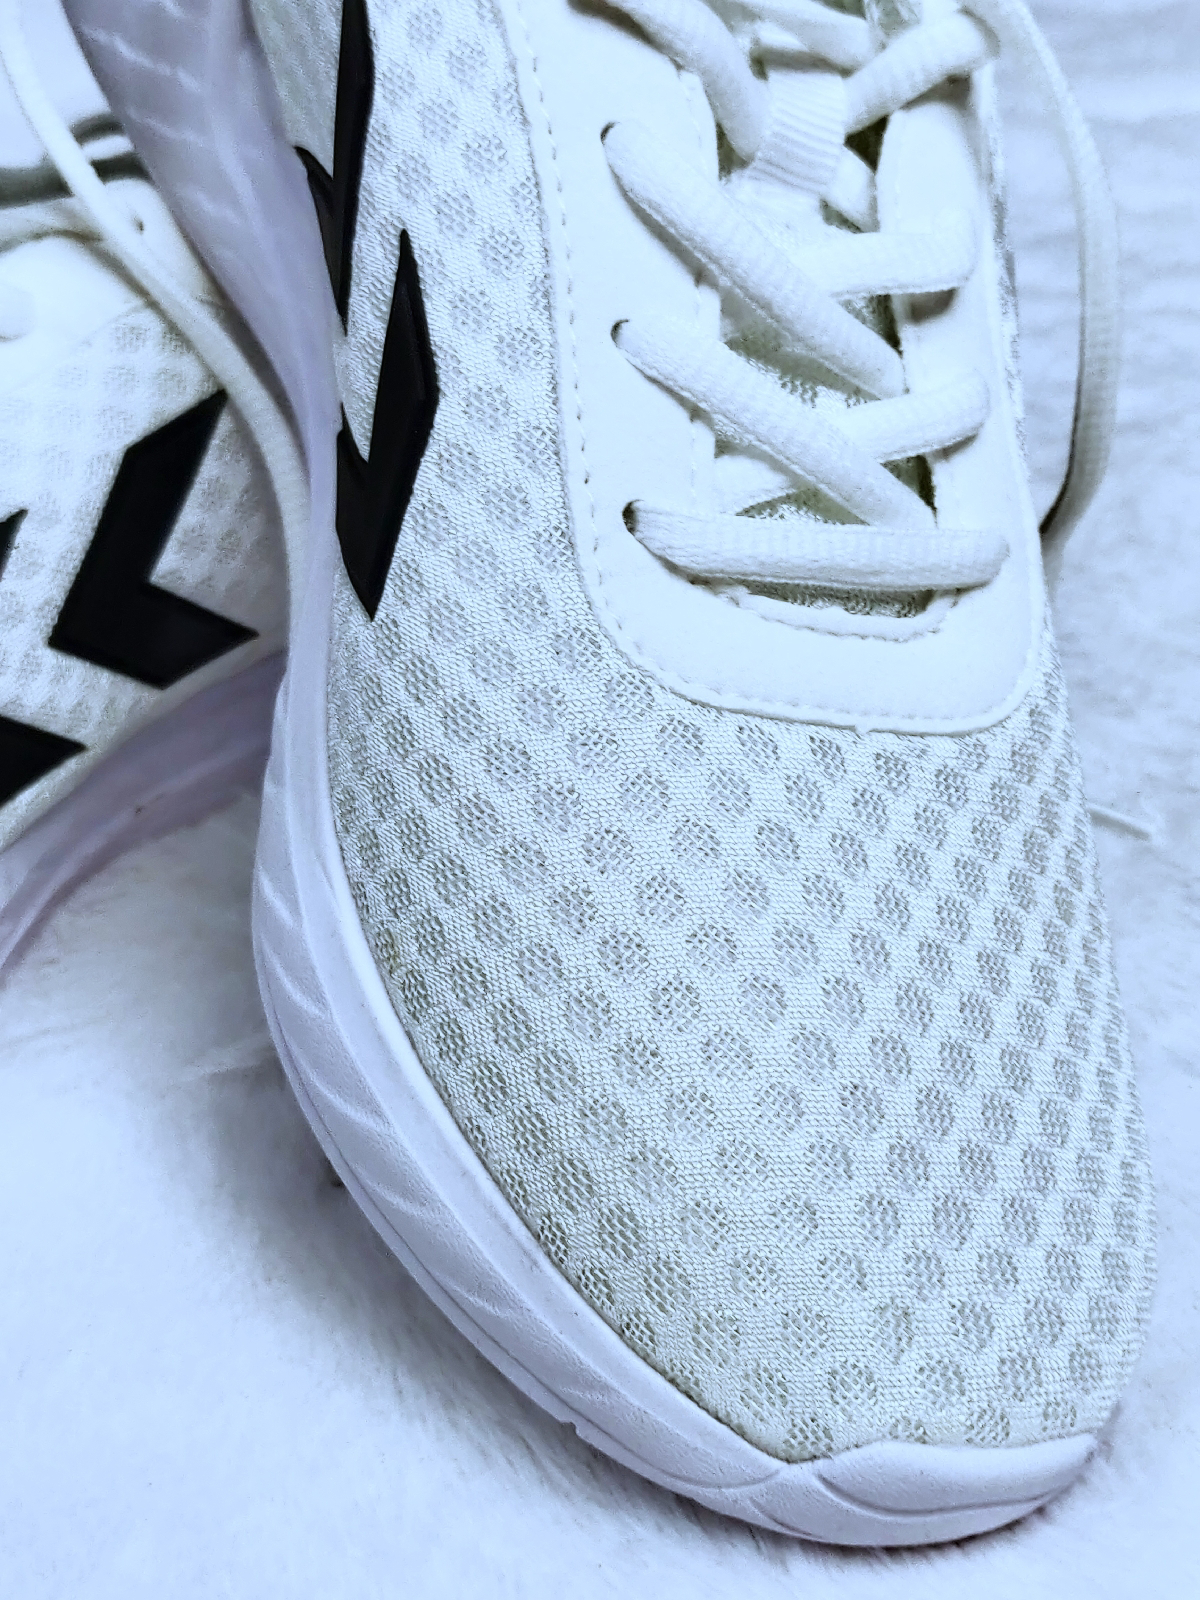 Hummel Shoe Review : You Choose Both Style and Comfort - Budget Belleza | Indian Beauty Blog | Looks | Product Reviews | Brands | Swatches